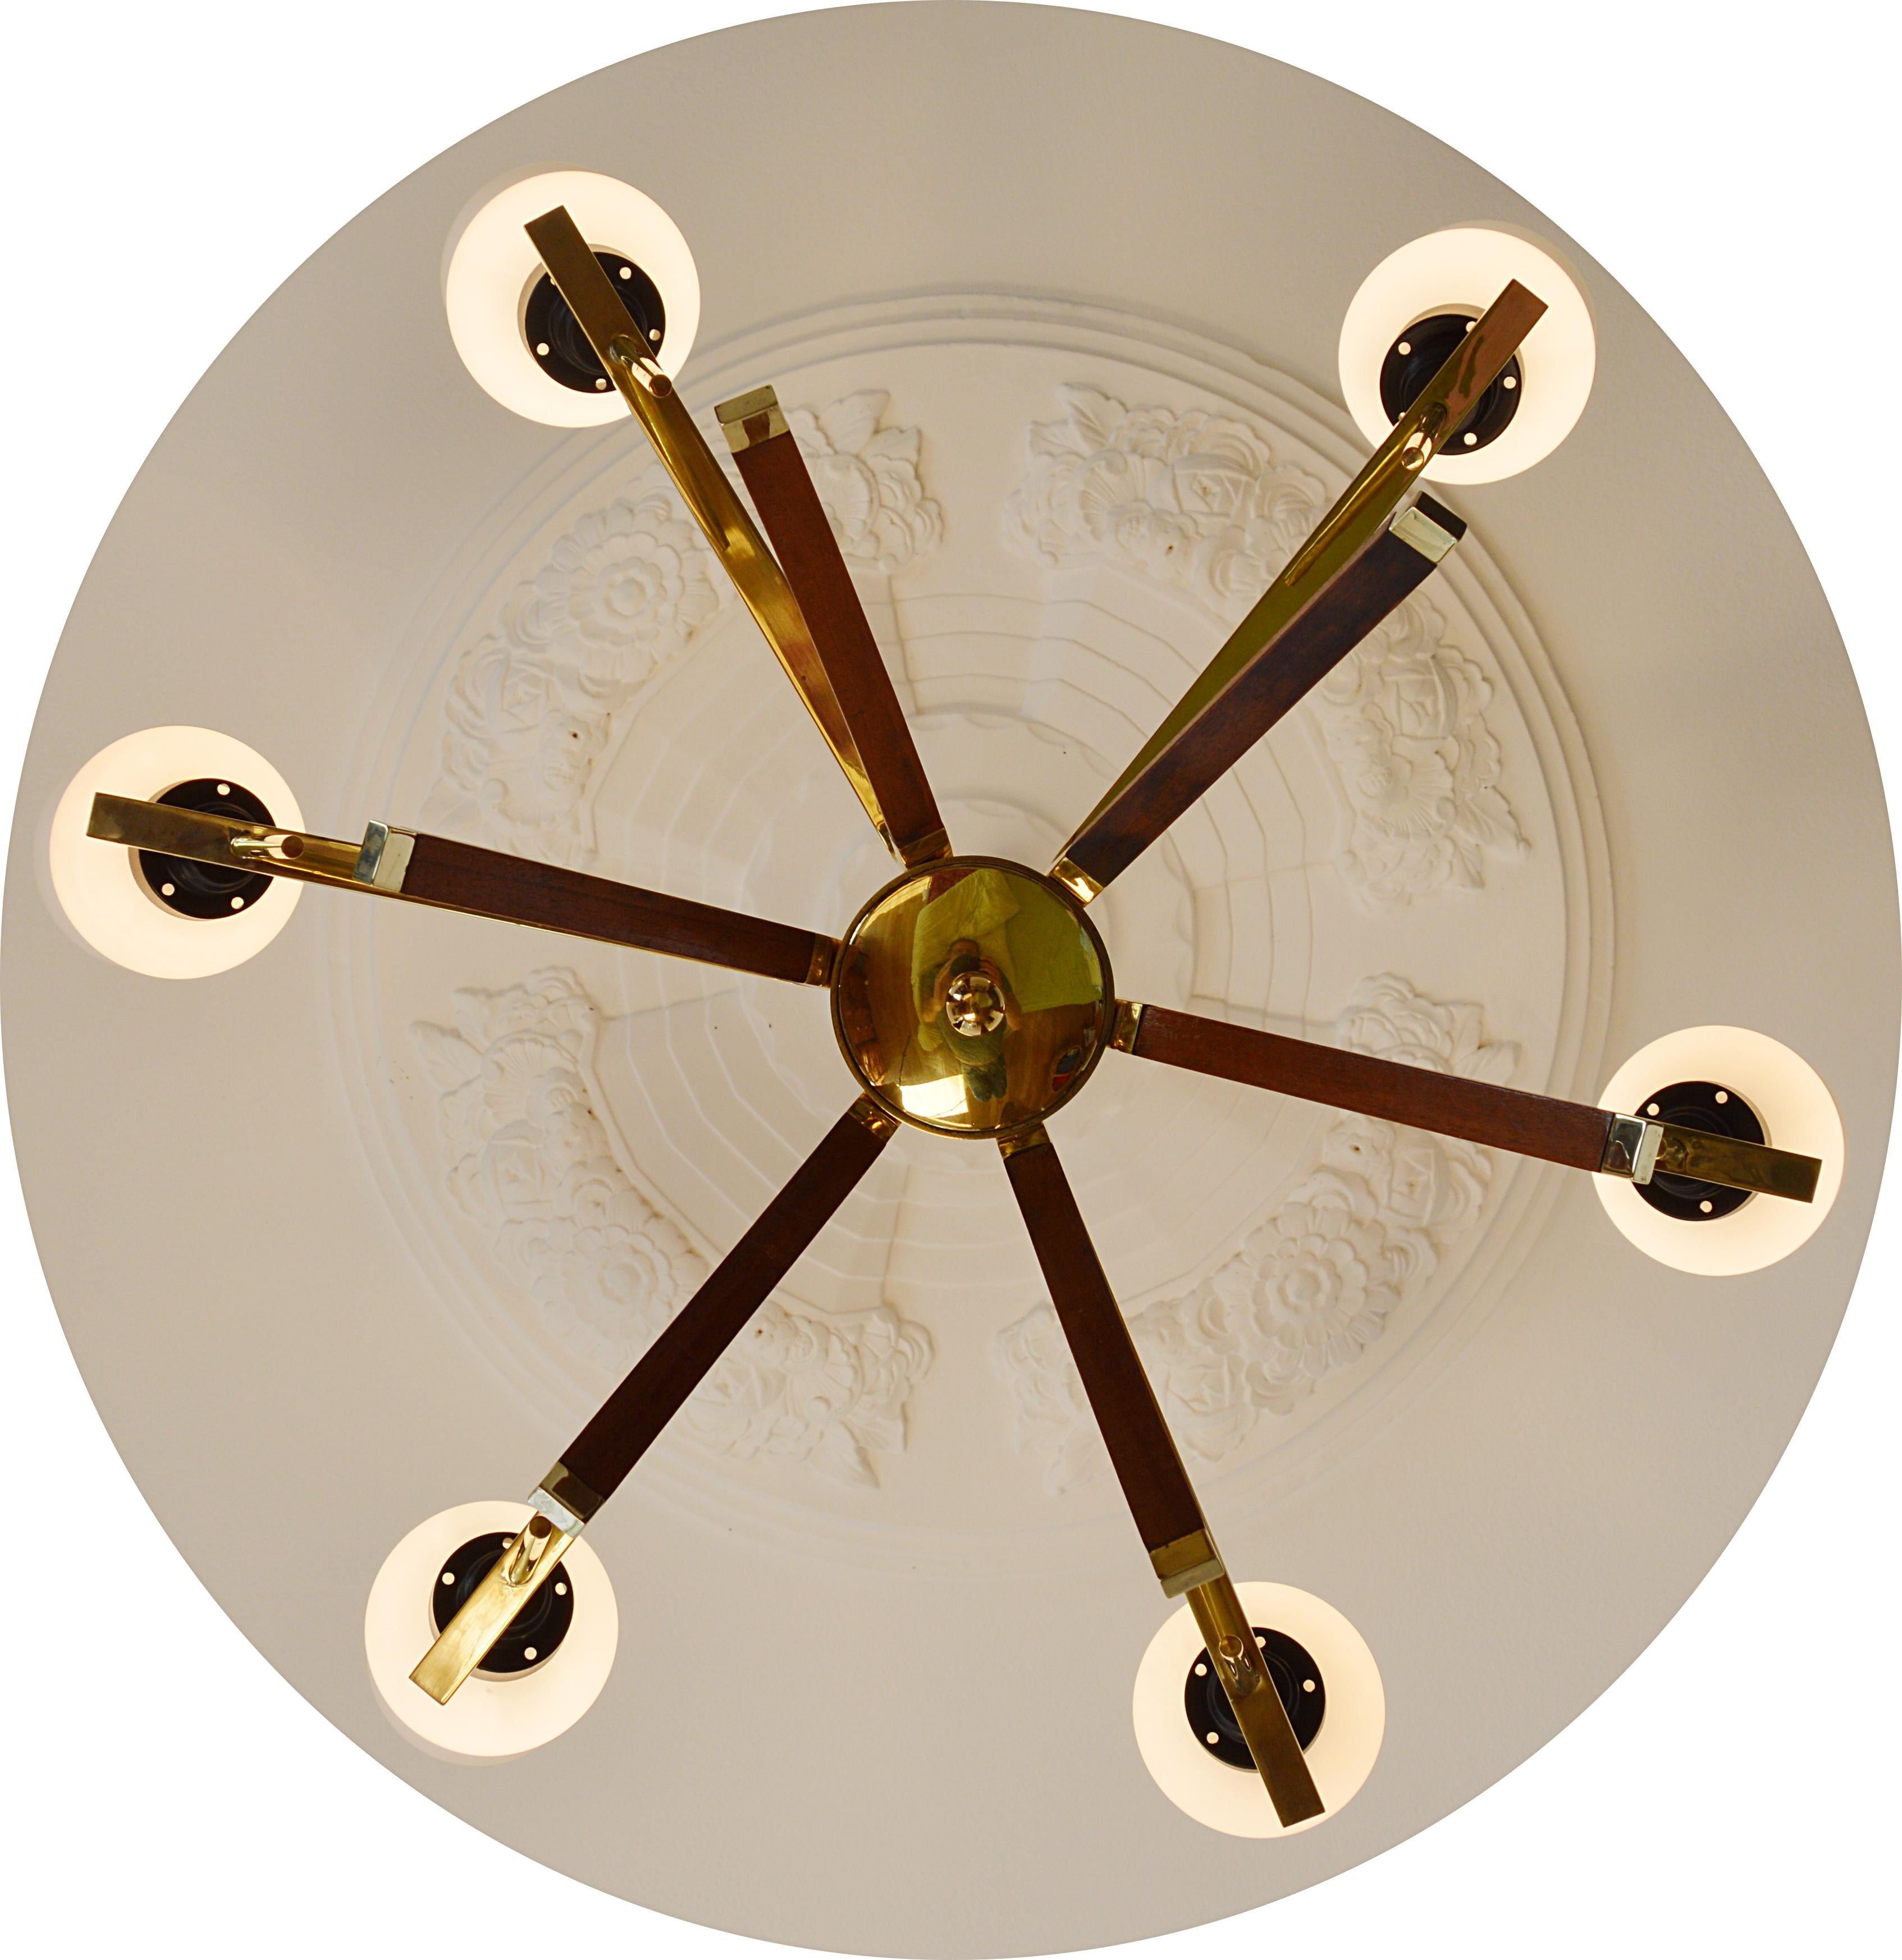 Arlus French Midcentury Chandelier, 1960s In Good Condition For Sale In Saint-Amans-des-Cots, FR